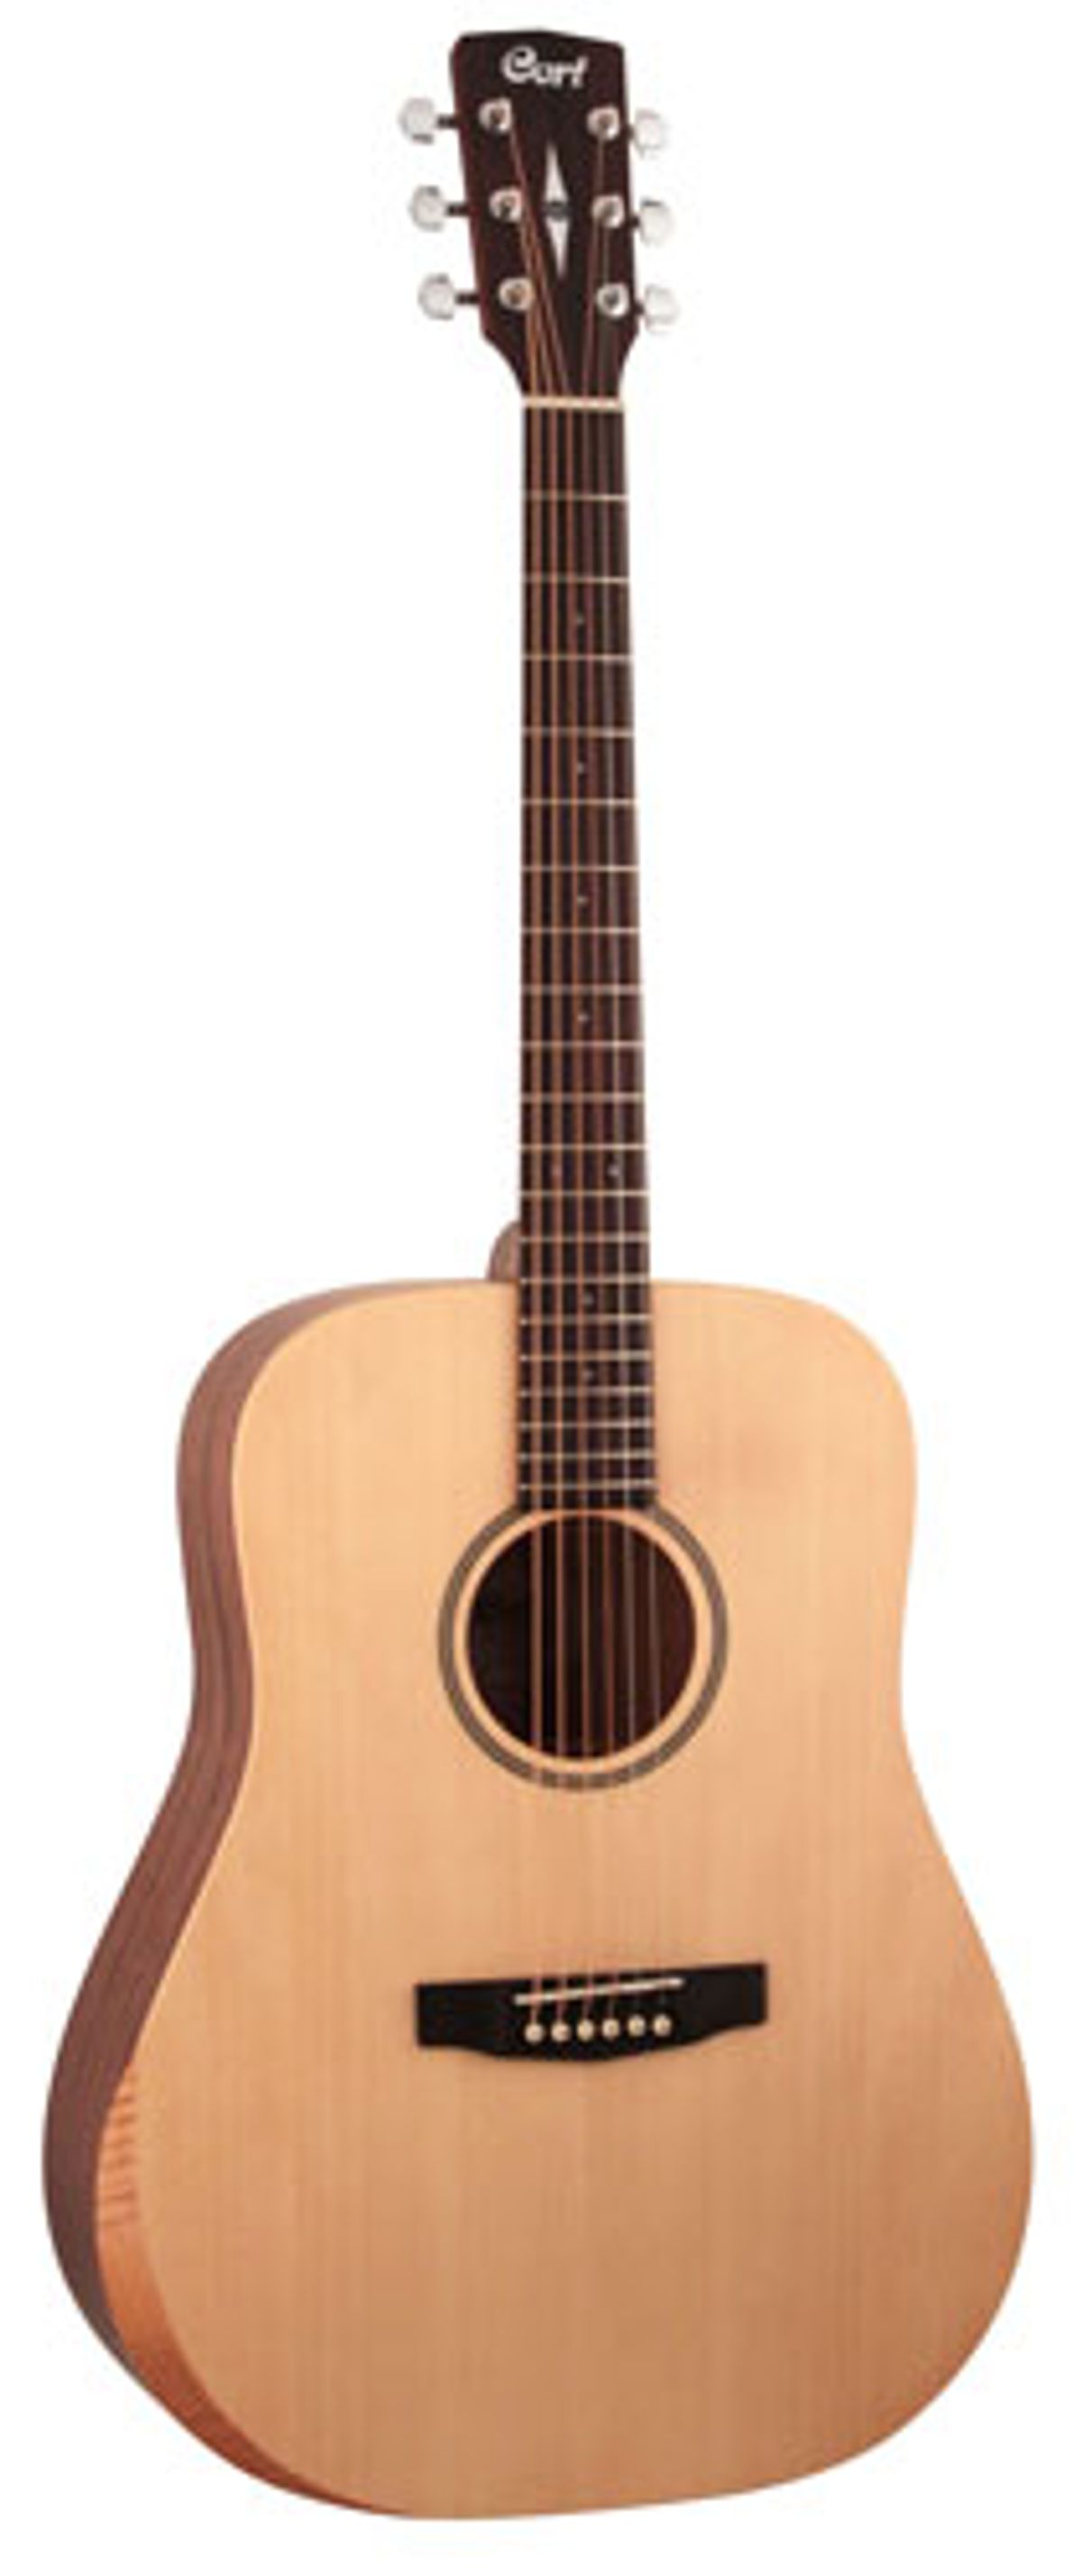 Cort Introduces Bevel Cut Collection of Acoustic Guitars